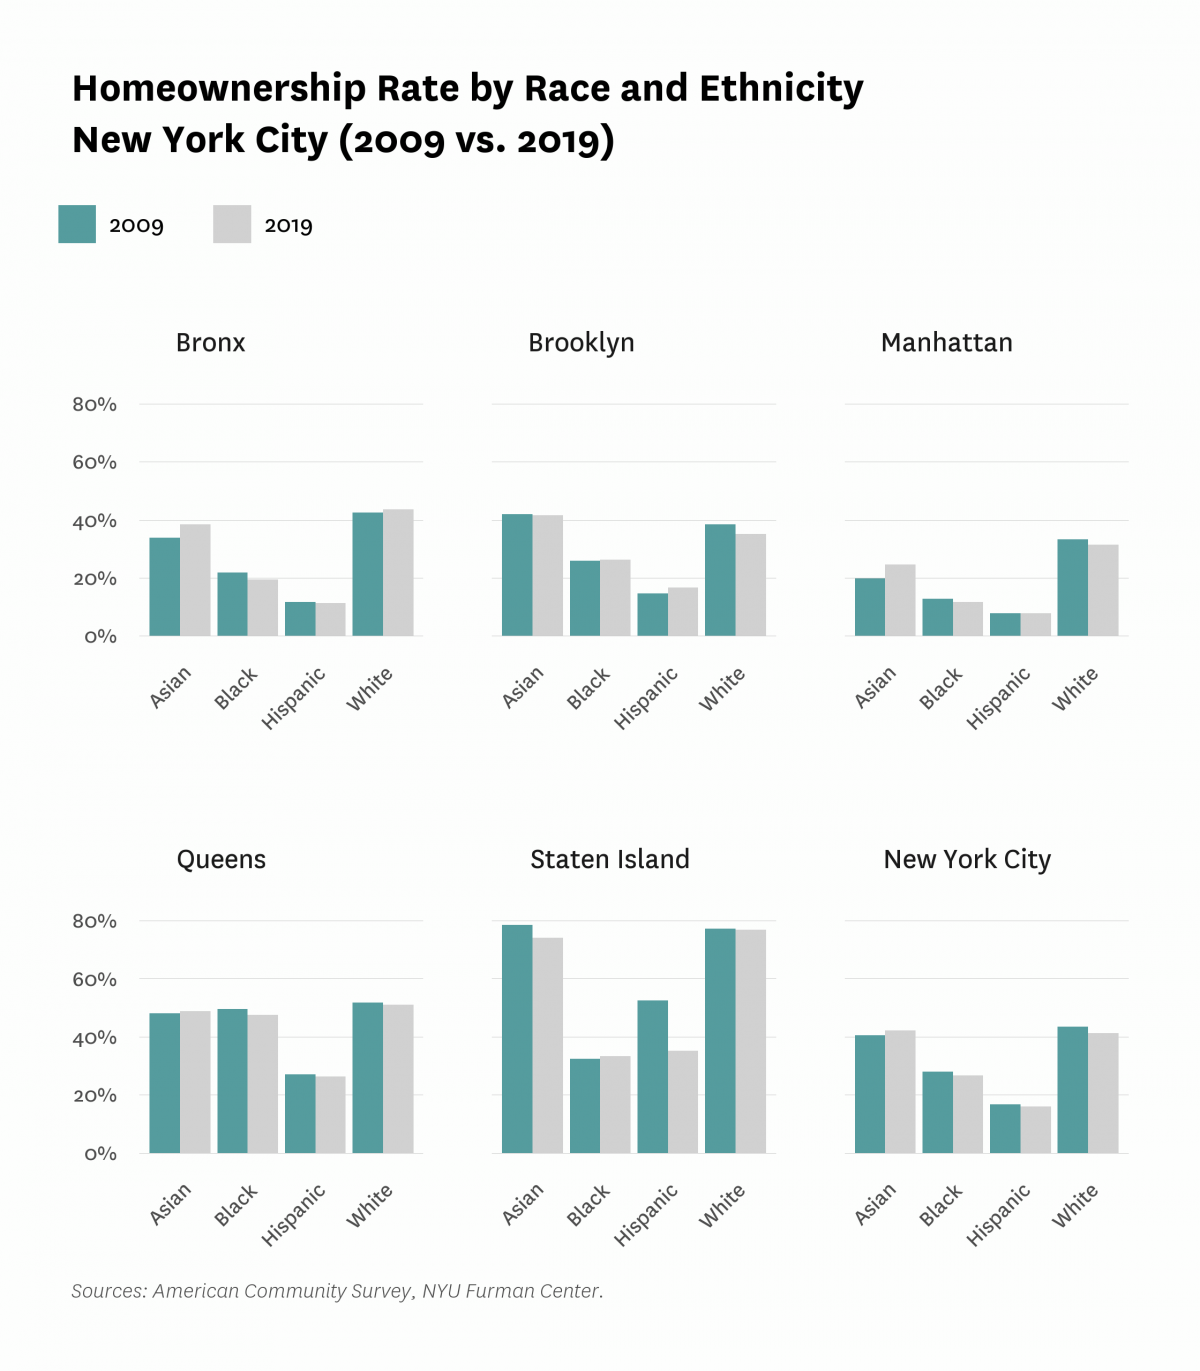 Bar graphs comparing the homeownership rate by race and ethnicity within each borough of New York City in 2009 versus 2019.